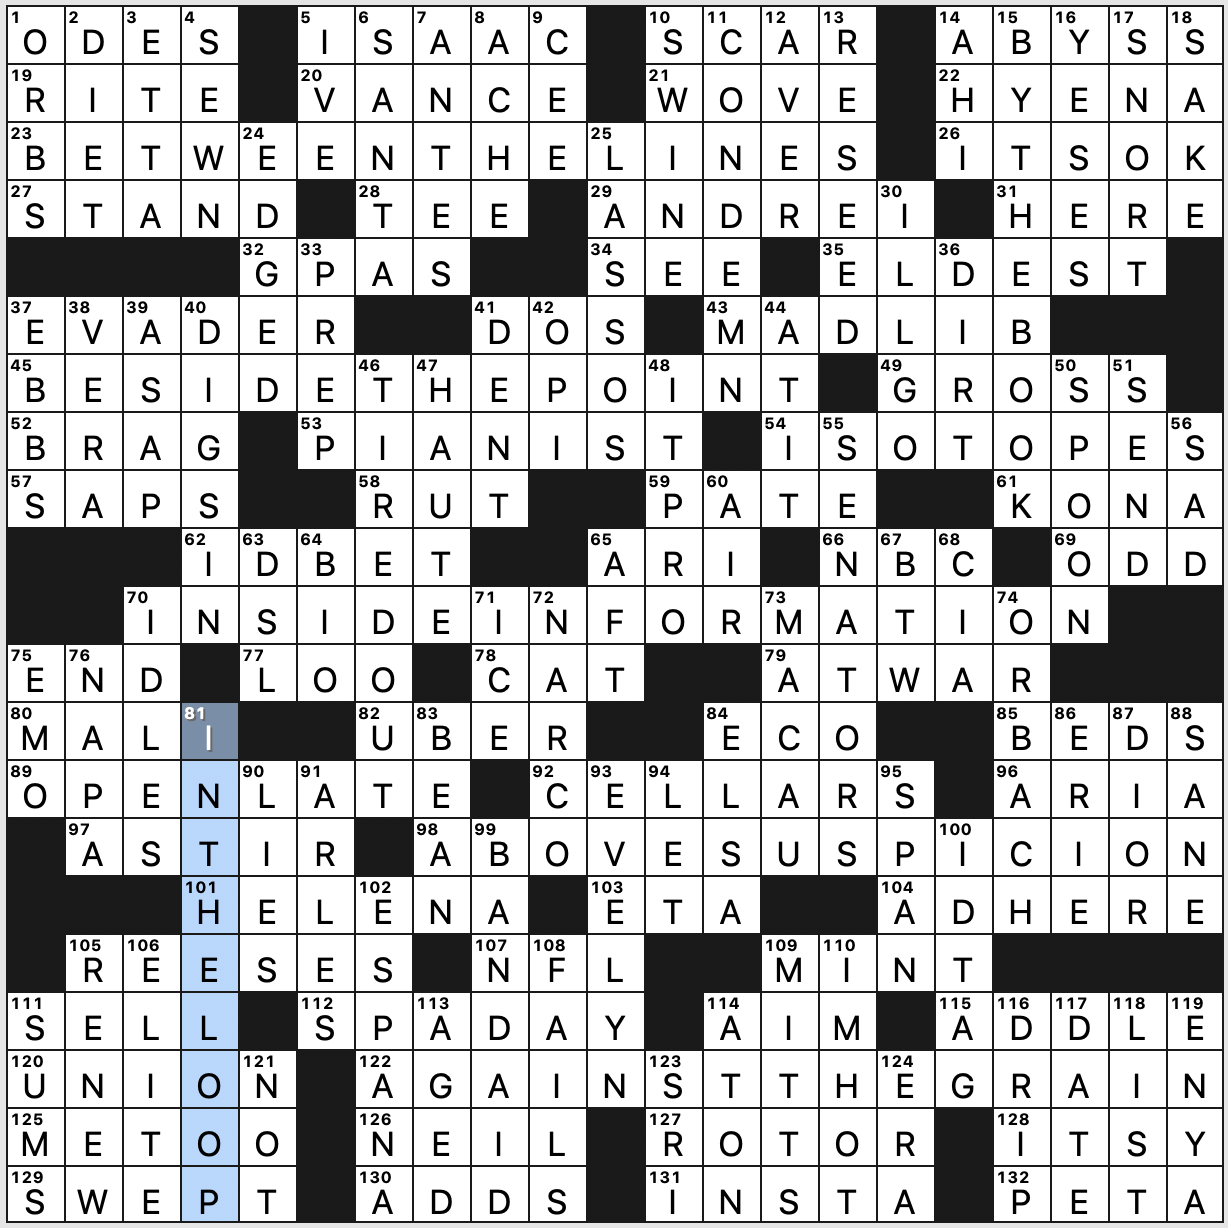 Sunday, September 5, 2021 | Diary of a Crossword Fiend